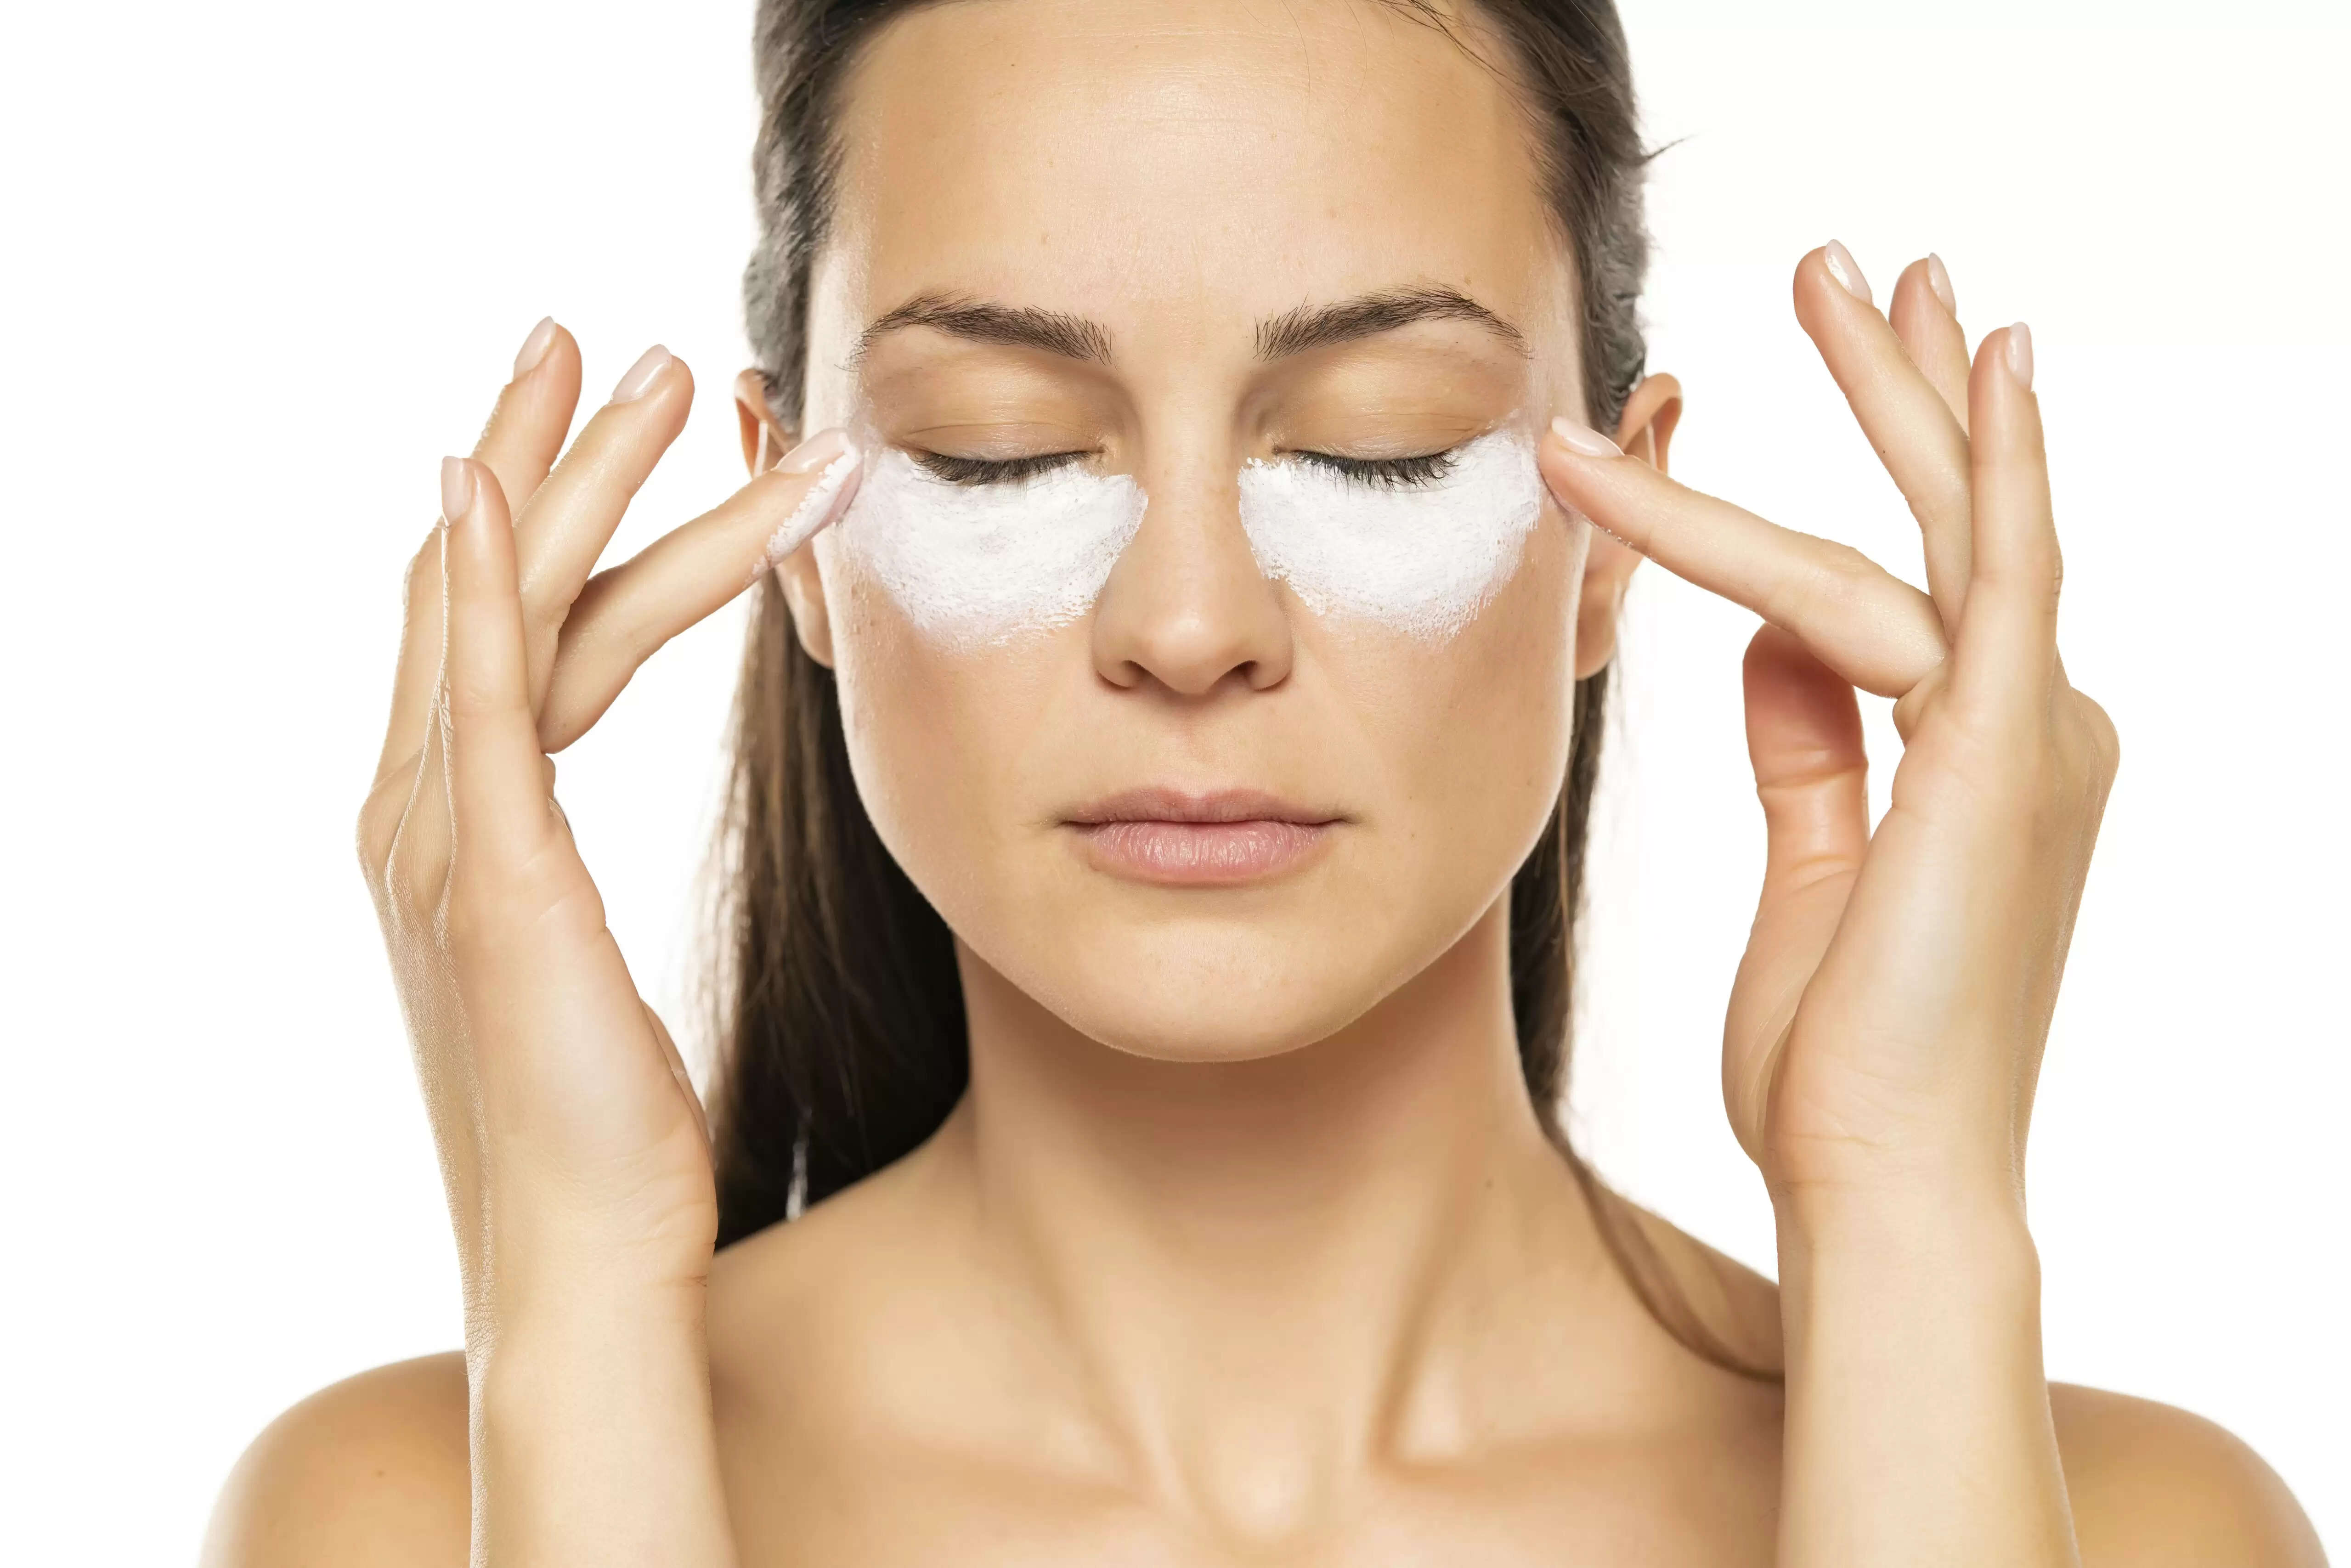 Want to get rid of dark circles? Here’s all you need to know about creams and treatments 